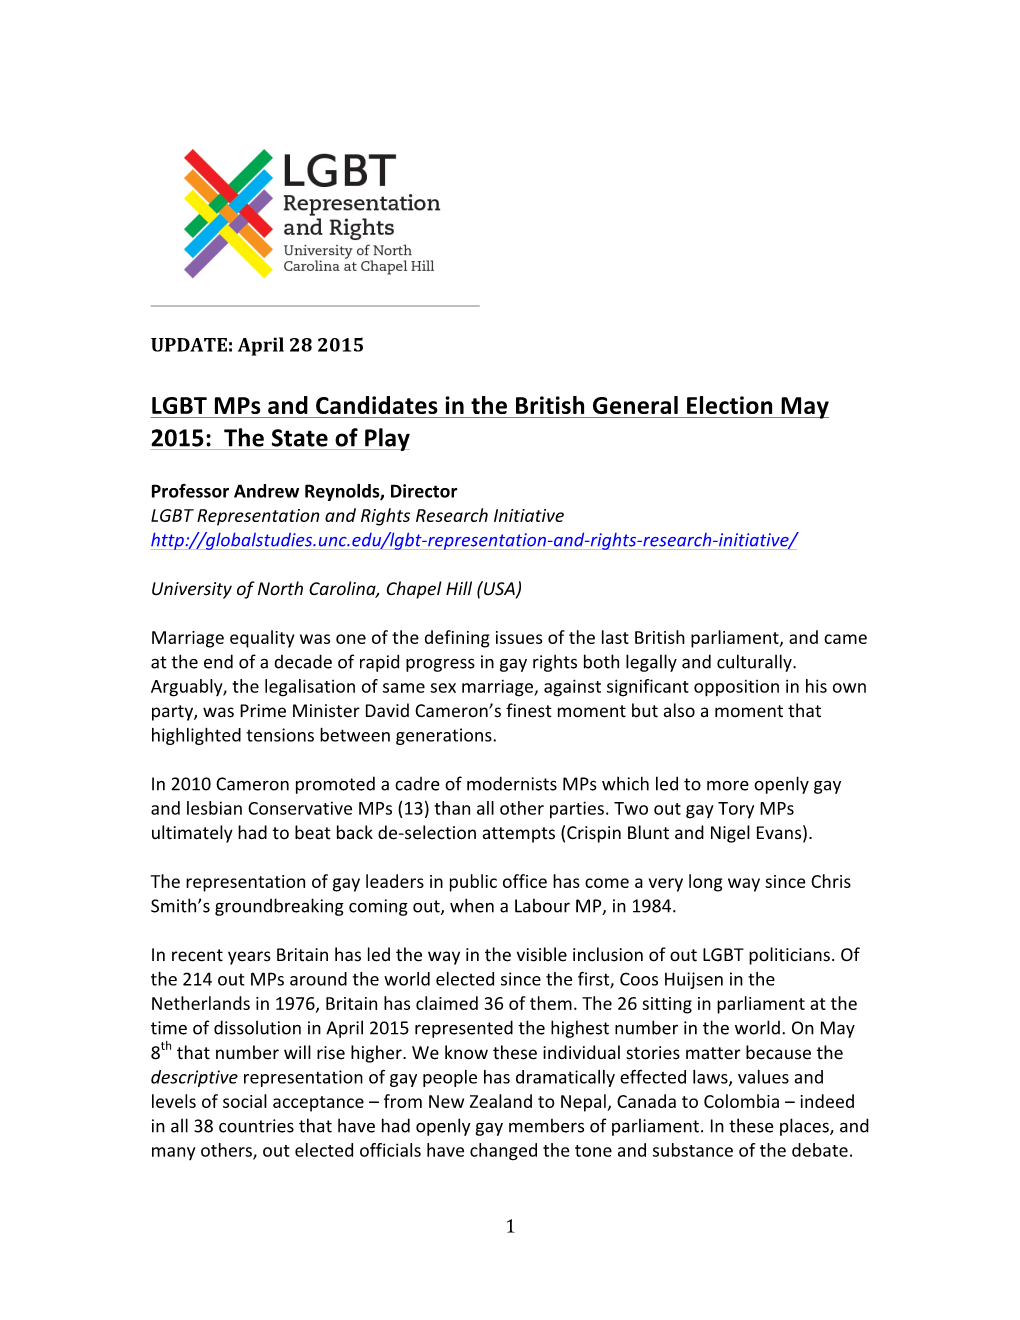 LGBT Mps and Candidates in the British General Election May 2015: the State of Play